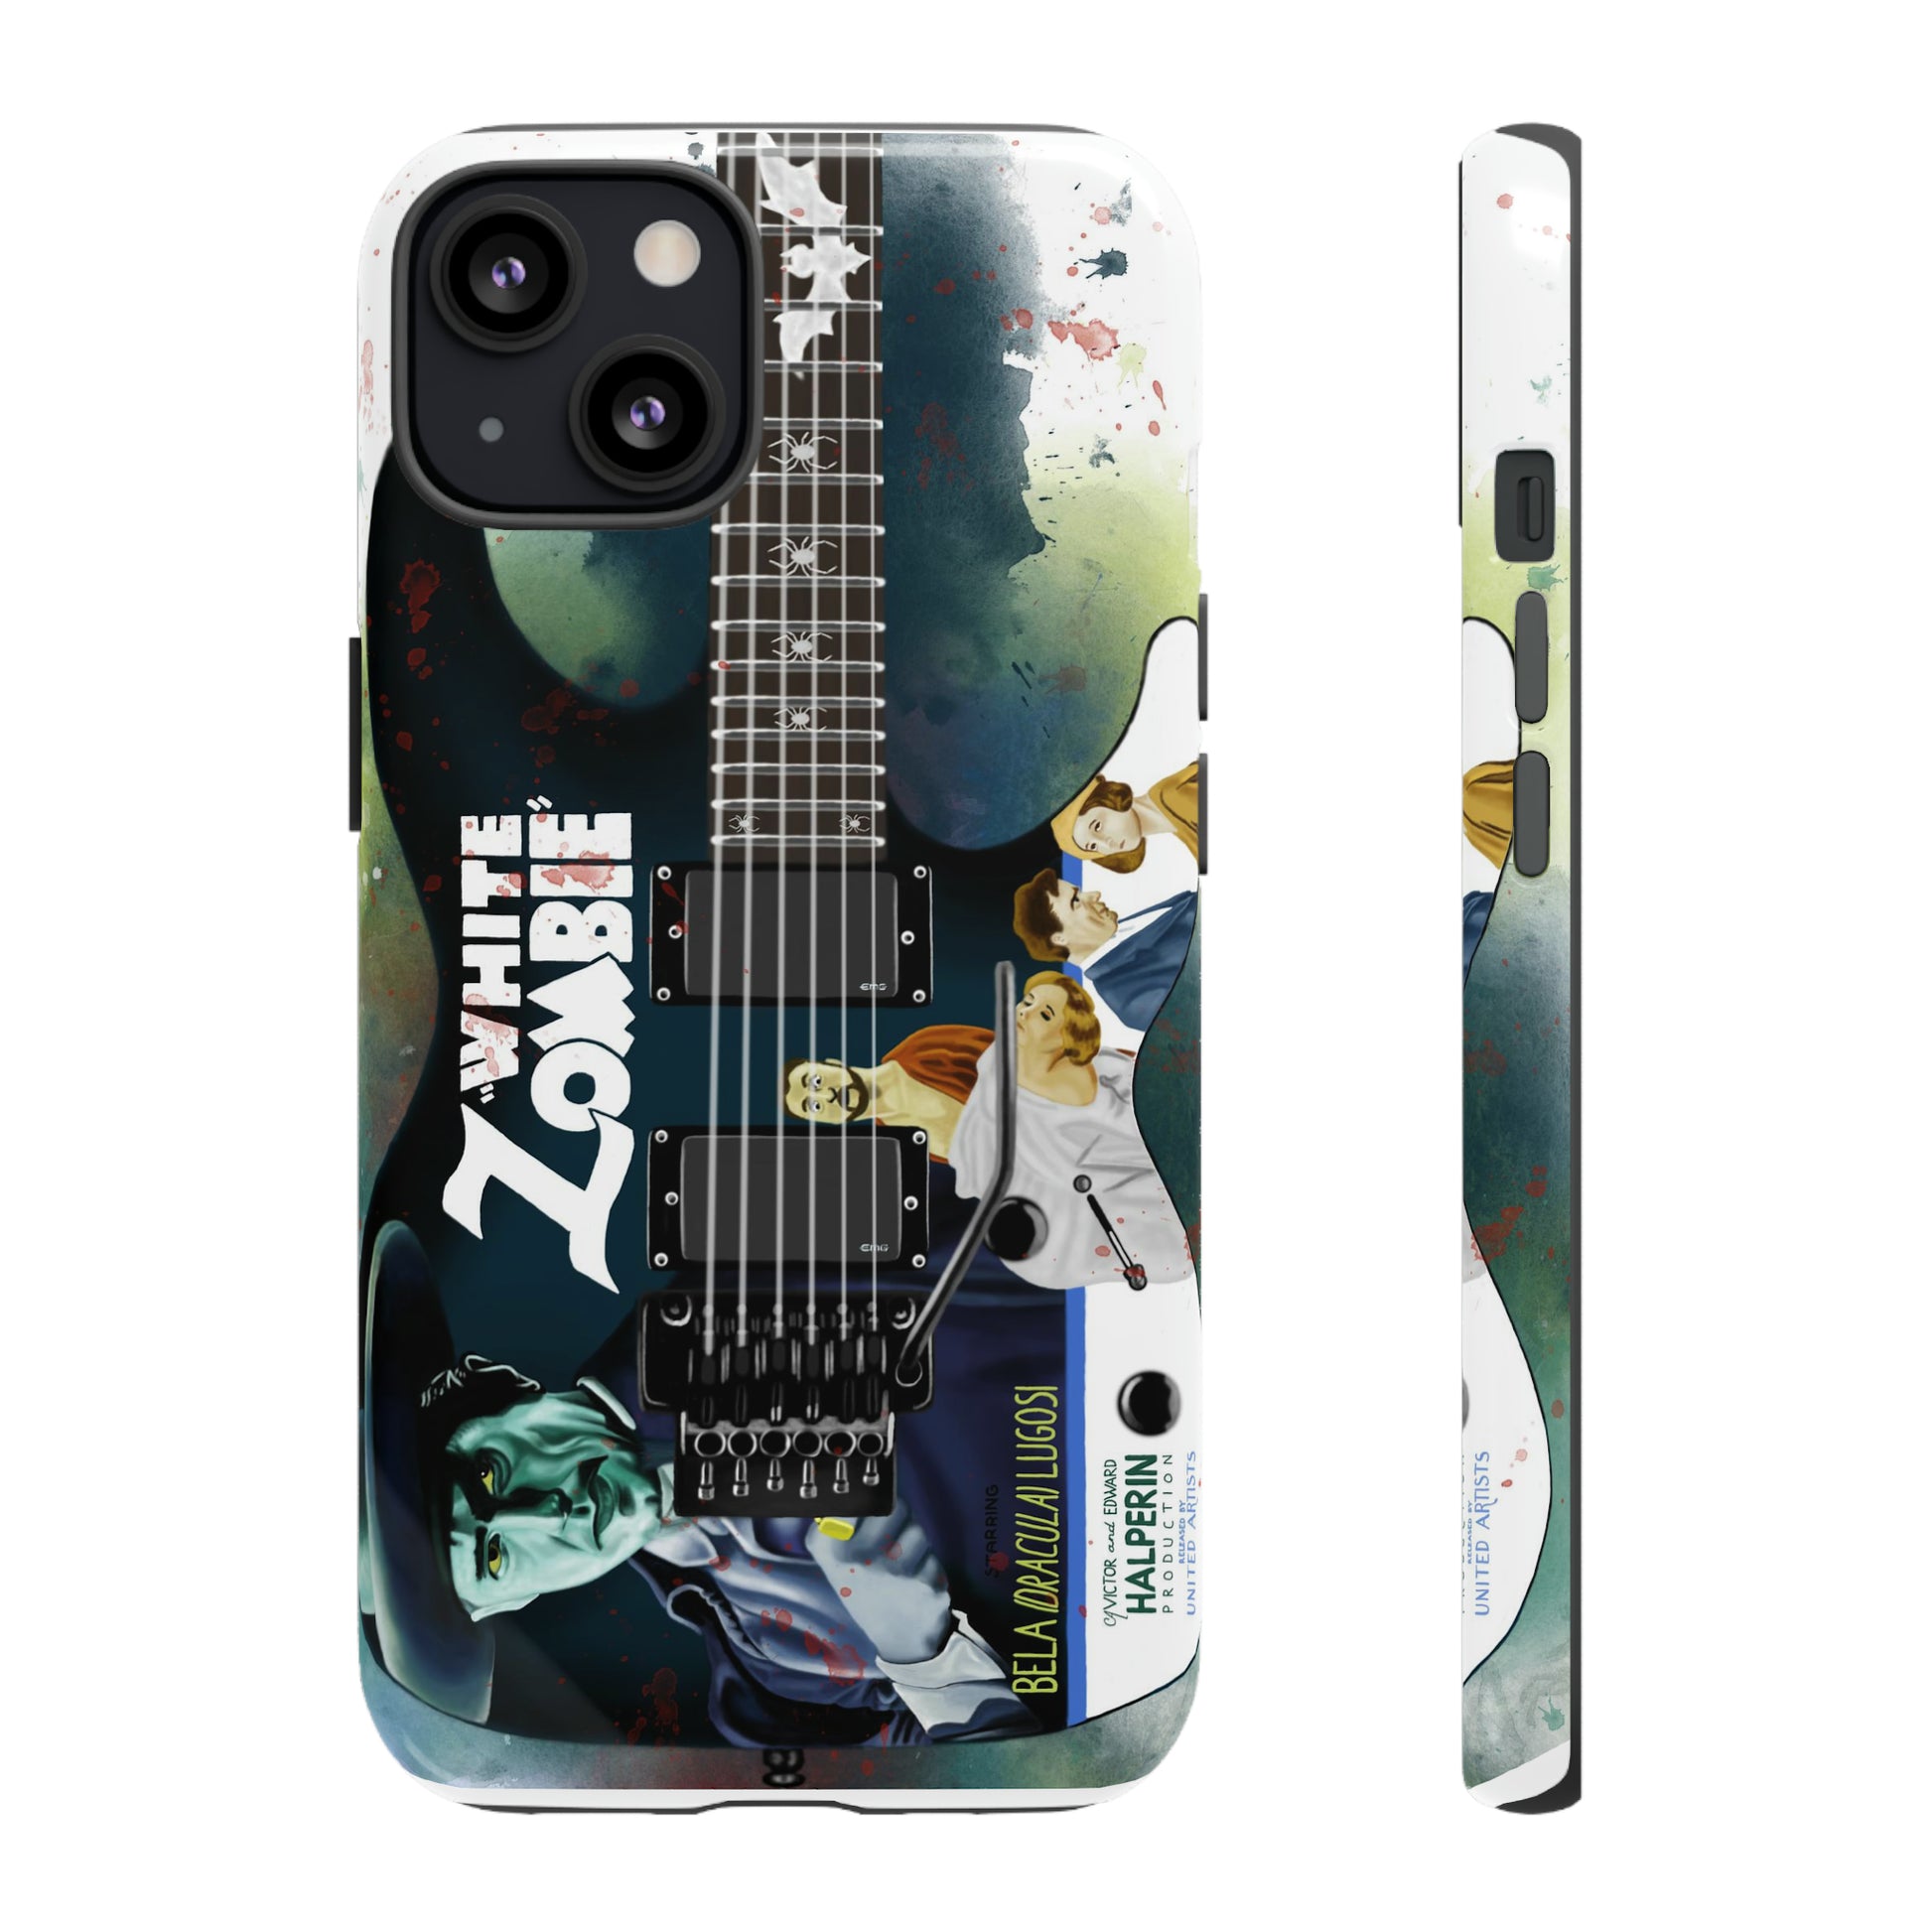 Digital painting of a blue electric guitar with a vintage movie poster on it printed on iphone phone case